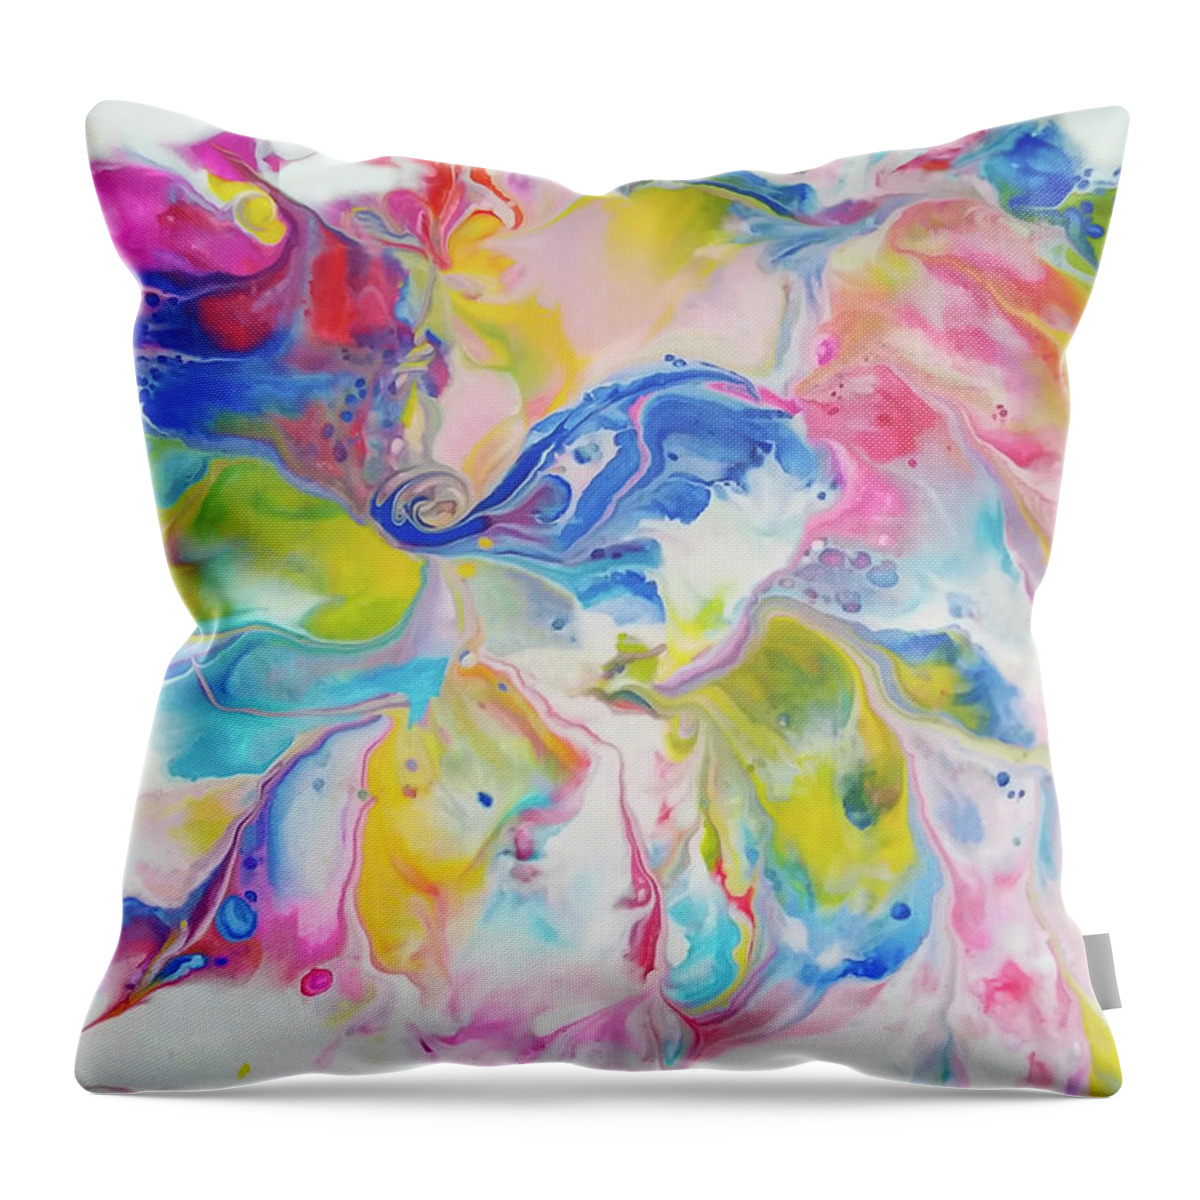 Rainbow Colors Abstract Elephant Acrylic Throw Pillow featuring the painting The Elephant by Deborah Erlandson